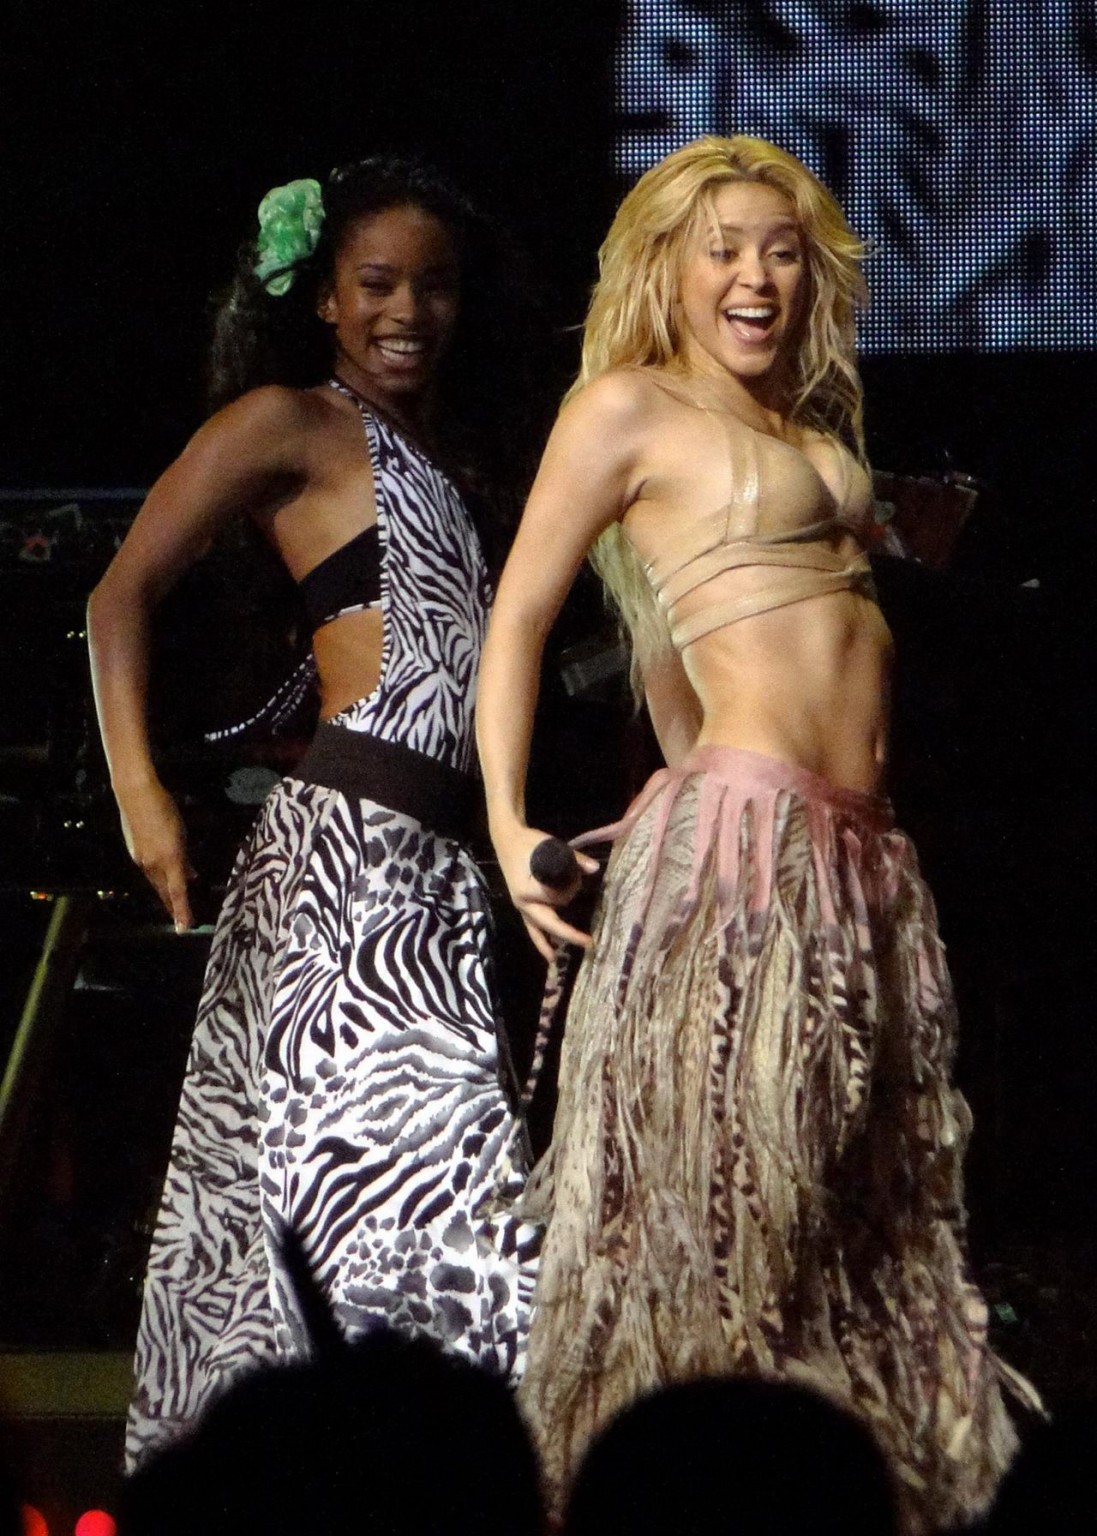 Shakira Ripoll belly dancing on the stage in Miami #75331648